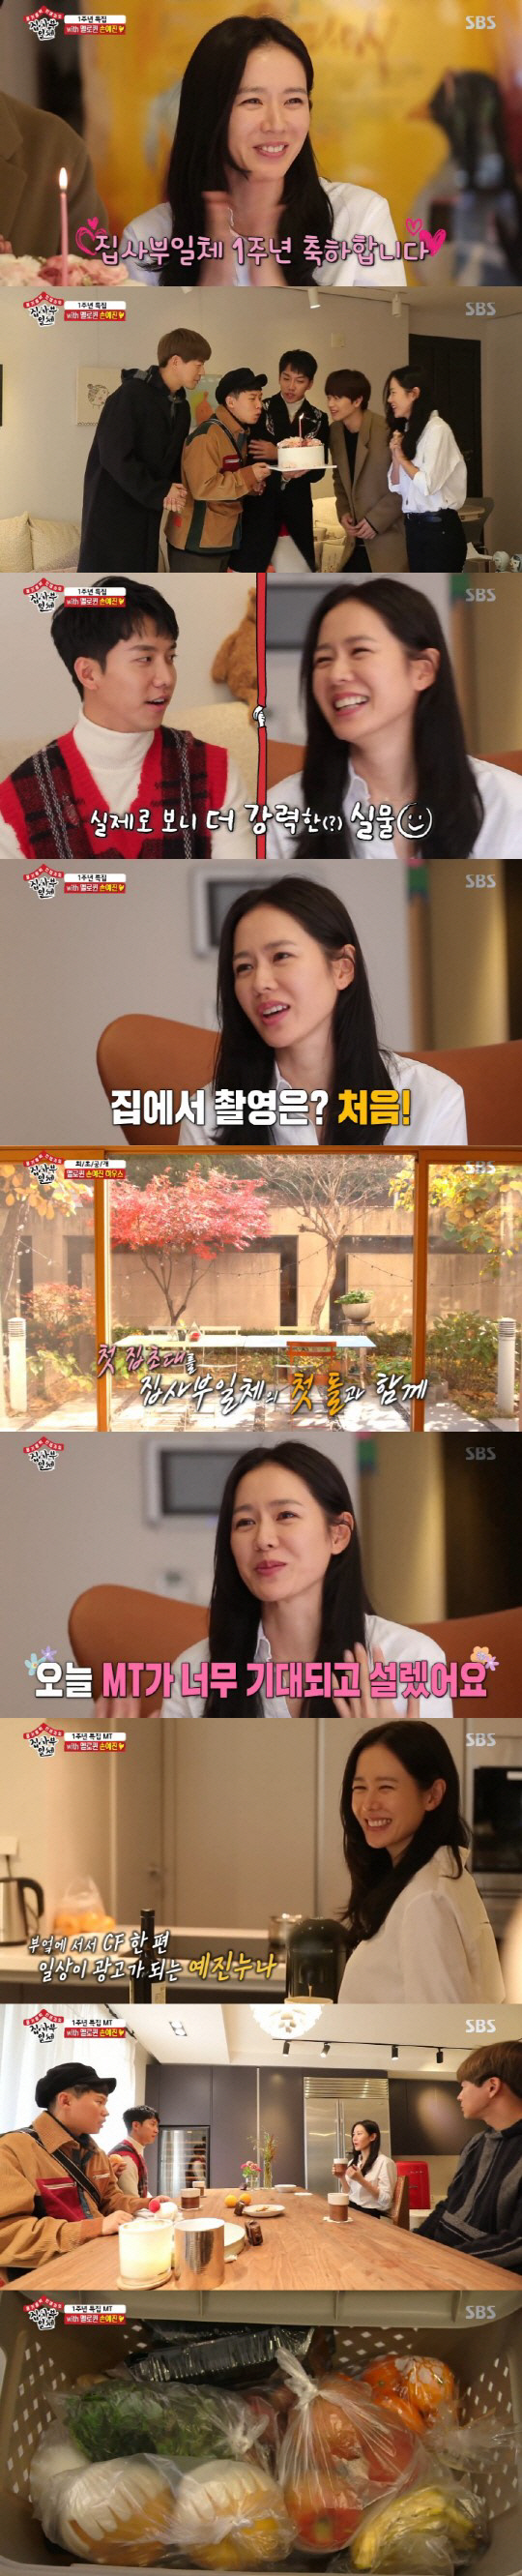 Gat Ye-jin appeared on All The Butlers.The SBS entertainment program All The Butlers, which was broadcast on the last two days, was featured on the MT for the first anniversary.In a hint video introducing a master with him on MT, Gong Hyo-jin appeared and surprised everyone; Gong Hyo-jin said of the master, Im worried that Ill faint because I like it.I am worried that Yang Se-hyeong will cry. Friend is a close friend who goes on a honeymoon trip together, he said. Friend is a unique friend who has tremendous momentum and does not get tired of physical strength.It is a good idea to make a friend for men, he added. It is a friend who has won many awards at various film festivals.Finally, Gong Hyo-jin promised to appear, saying, I will go to Christmas or a gift for the Chinese New Year, not a master.Son Ye-jin said, I thought it was awkward to hear the name Sabu, but I wanted to give a gift for the first anniversary.Then he told the members to call him sister instead of master. Yook Sungjae, who heard it, once again blushed with shame.Before leaving MT in earnest, Son Ye-jin found Pilates Studios with members, saying it was a promise with me; a studio where Son Ye-jin comes more often than home.Ive been there for over 10 years, my agency has been there for 19 years, and my hair salon has been around for almost 15 years, Son Ye-jin said.He won the TRX instructor certificate eight years ago, and he surprised the members with his level Pilates skills.A pension where the members arrived with a thrilling mind, setting the name of the club yes.Son Ye-jin surprised the members by introducing Son Ye-jin was the place where I went with my ex-boyfriend 15 years ago, in my early 20s.It turns out that this pension was the place where Son Ye-jin and Jung Woo-sung starred in the movie Easer in My Head.Son Ye-jin and the members took a commemorative photo, reenacting a scene from the movie.Son Ye-jin, who proposed a dinner-time bet, as Gong Hyo-jin, who introduced him as Queen of Game, and Chairman of the Circle Son Ye-jin, suggested a dinner bet game.When Son Ye-jin, who showed a child-like excitement by preparing game tools himself, became a game, he burned his desire with a 180-degree change of eyes.I will not see it as the chairman. He said, Is not it natural? On the other hand, All The Butlers is an entertainment program that depicts the life tutoring of young people full of question marks and my way geek masters.Lee Seung-gi, Lee Sang-yoon, Yook Sungjae, and Yang Se-hyeong are in regular appearances; it airs every Sunday at 6:25.